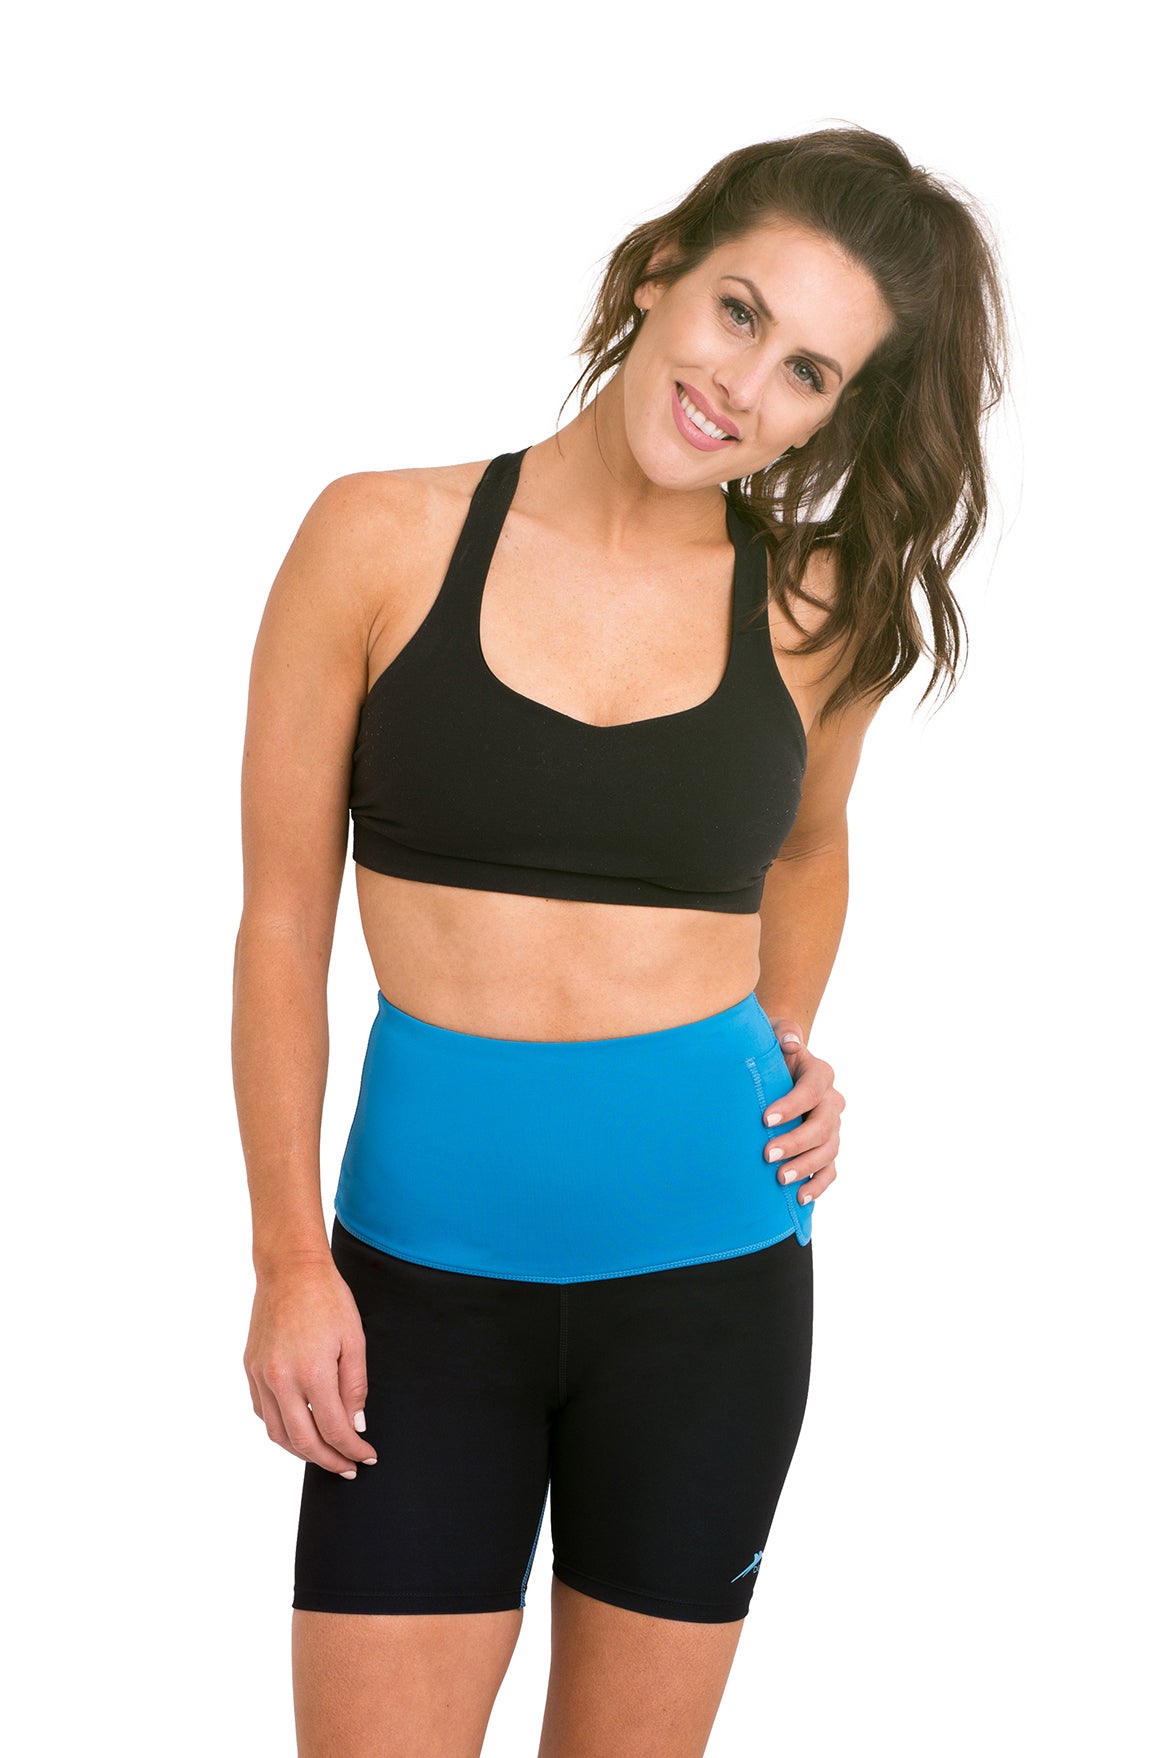 Mineral Infused High Waist Exercise Shorts - Black/Turquoise - Delfin Brands